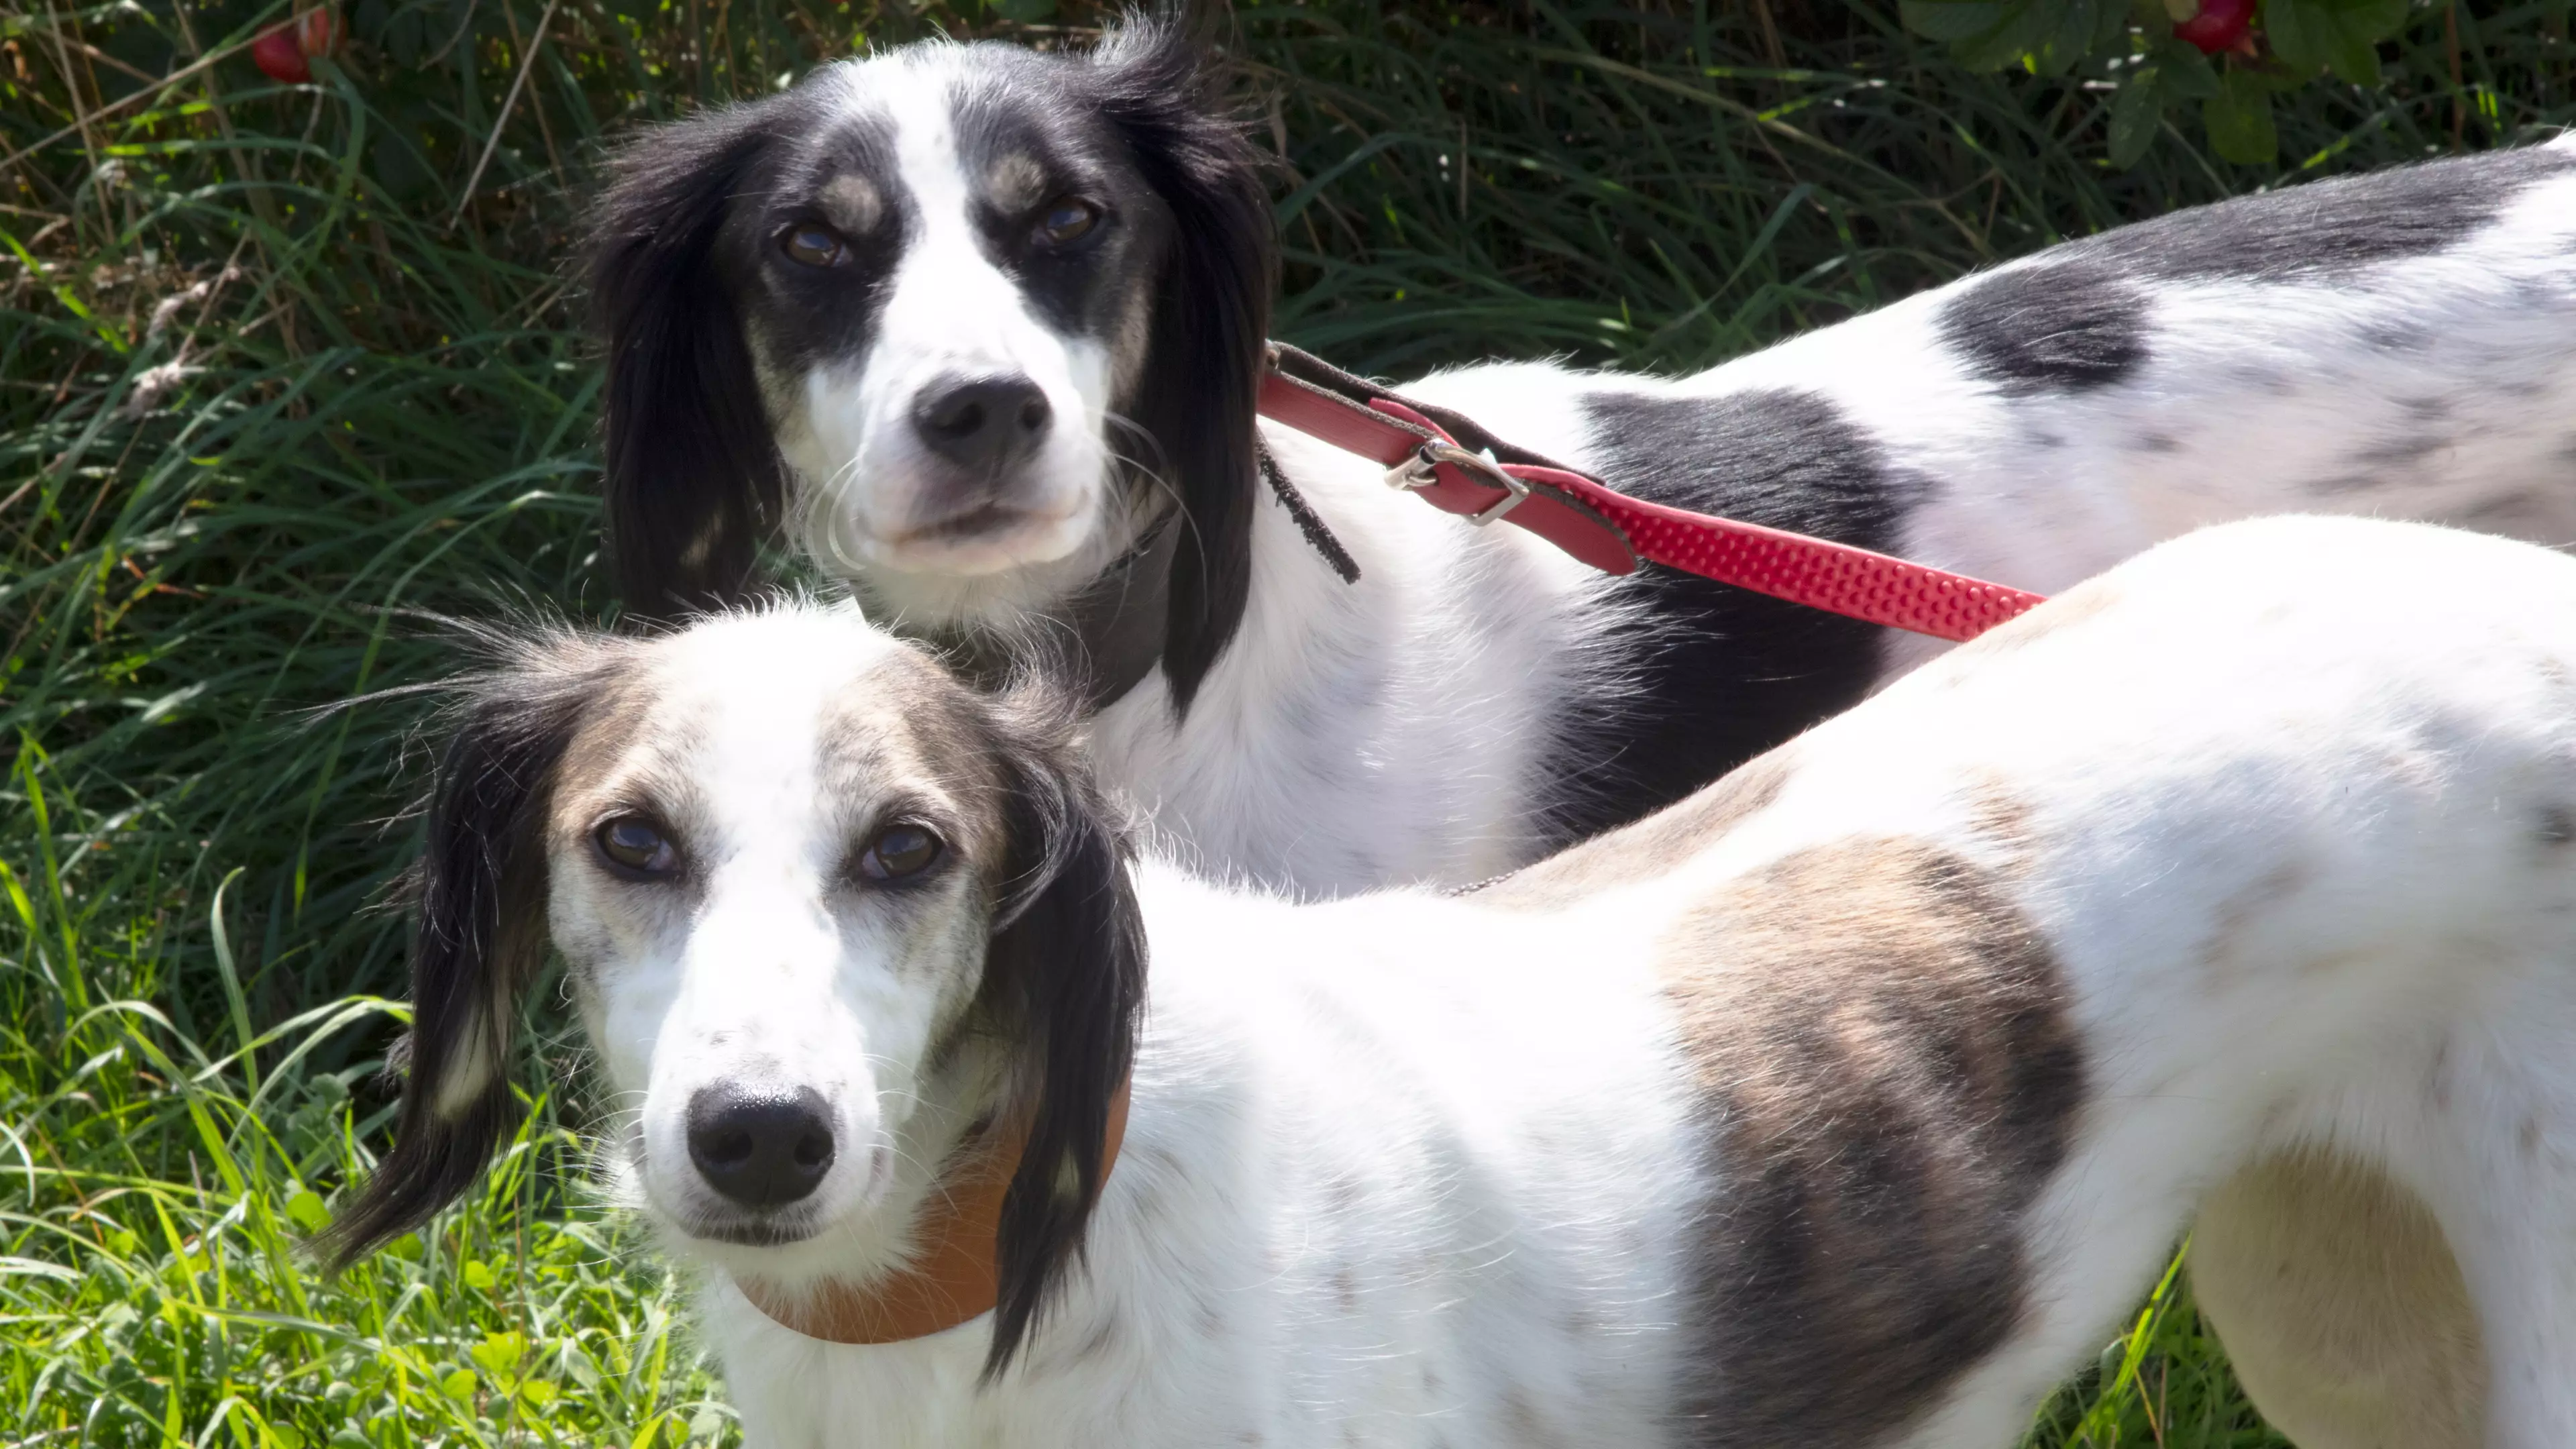 Nation's Most Inseperable 'Lovedogs' Looking For Their Forever Home